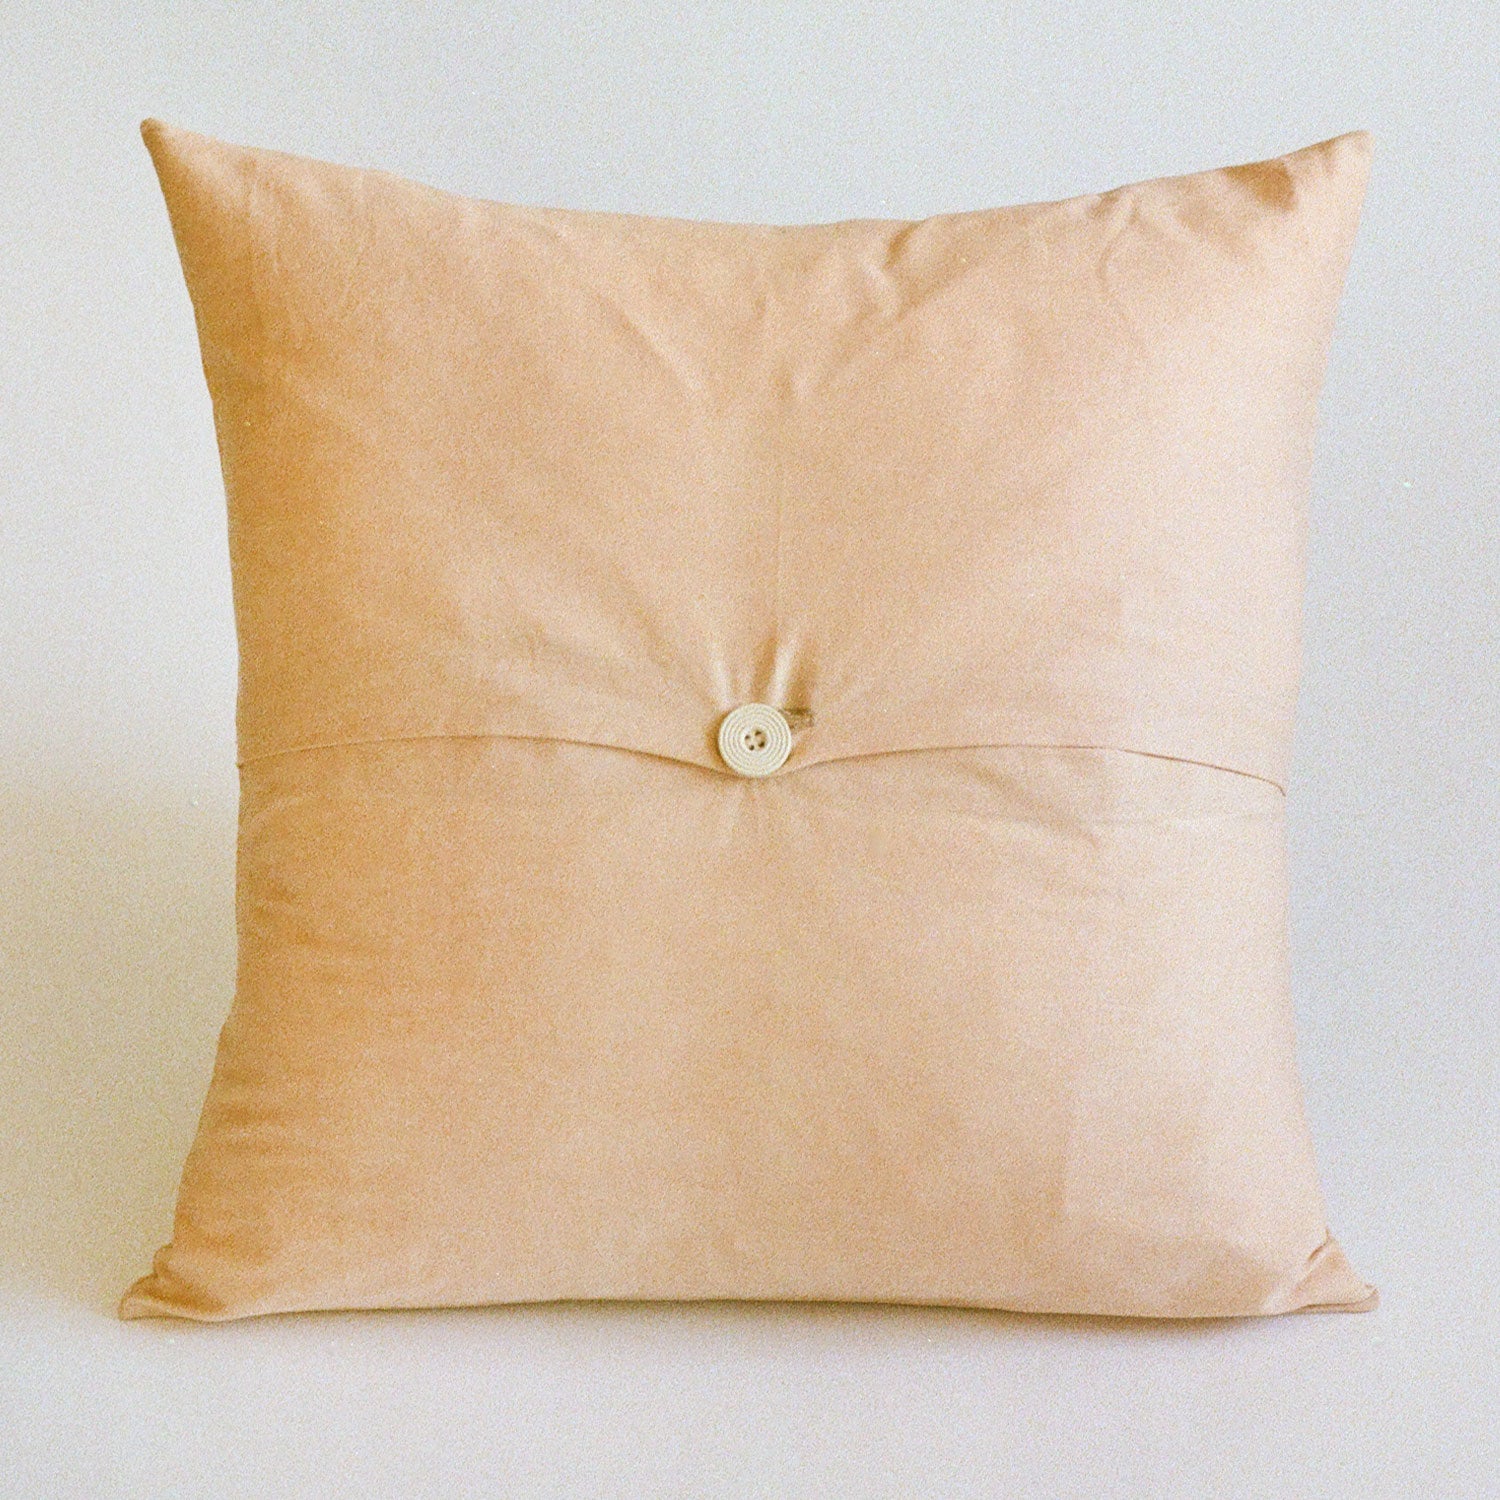 The Keyboard Pillow Cover in Peach Cranberry